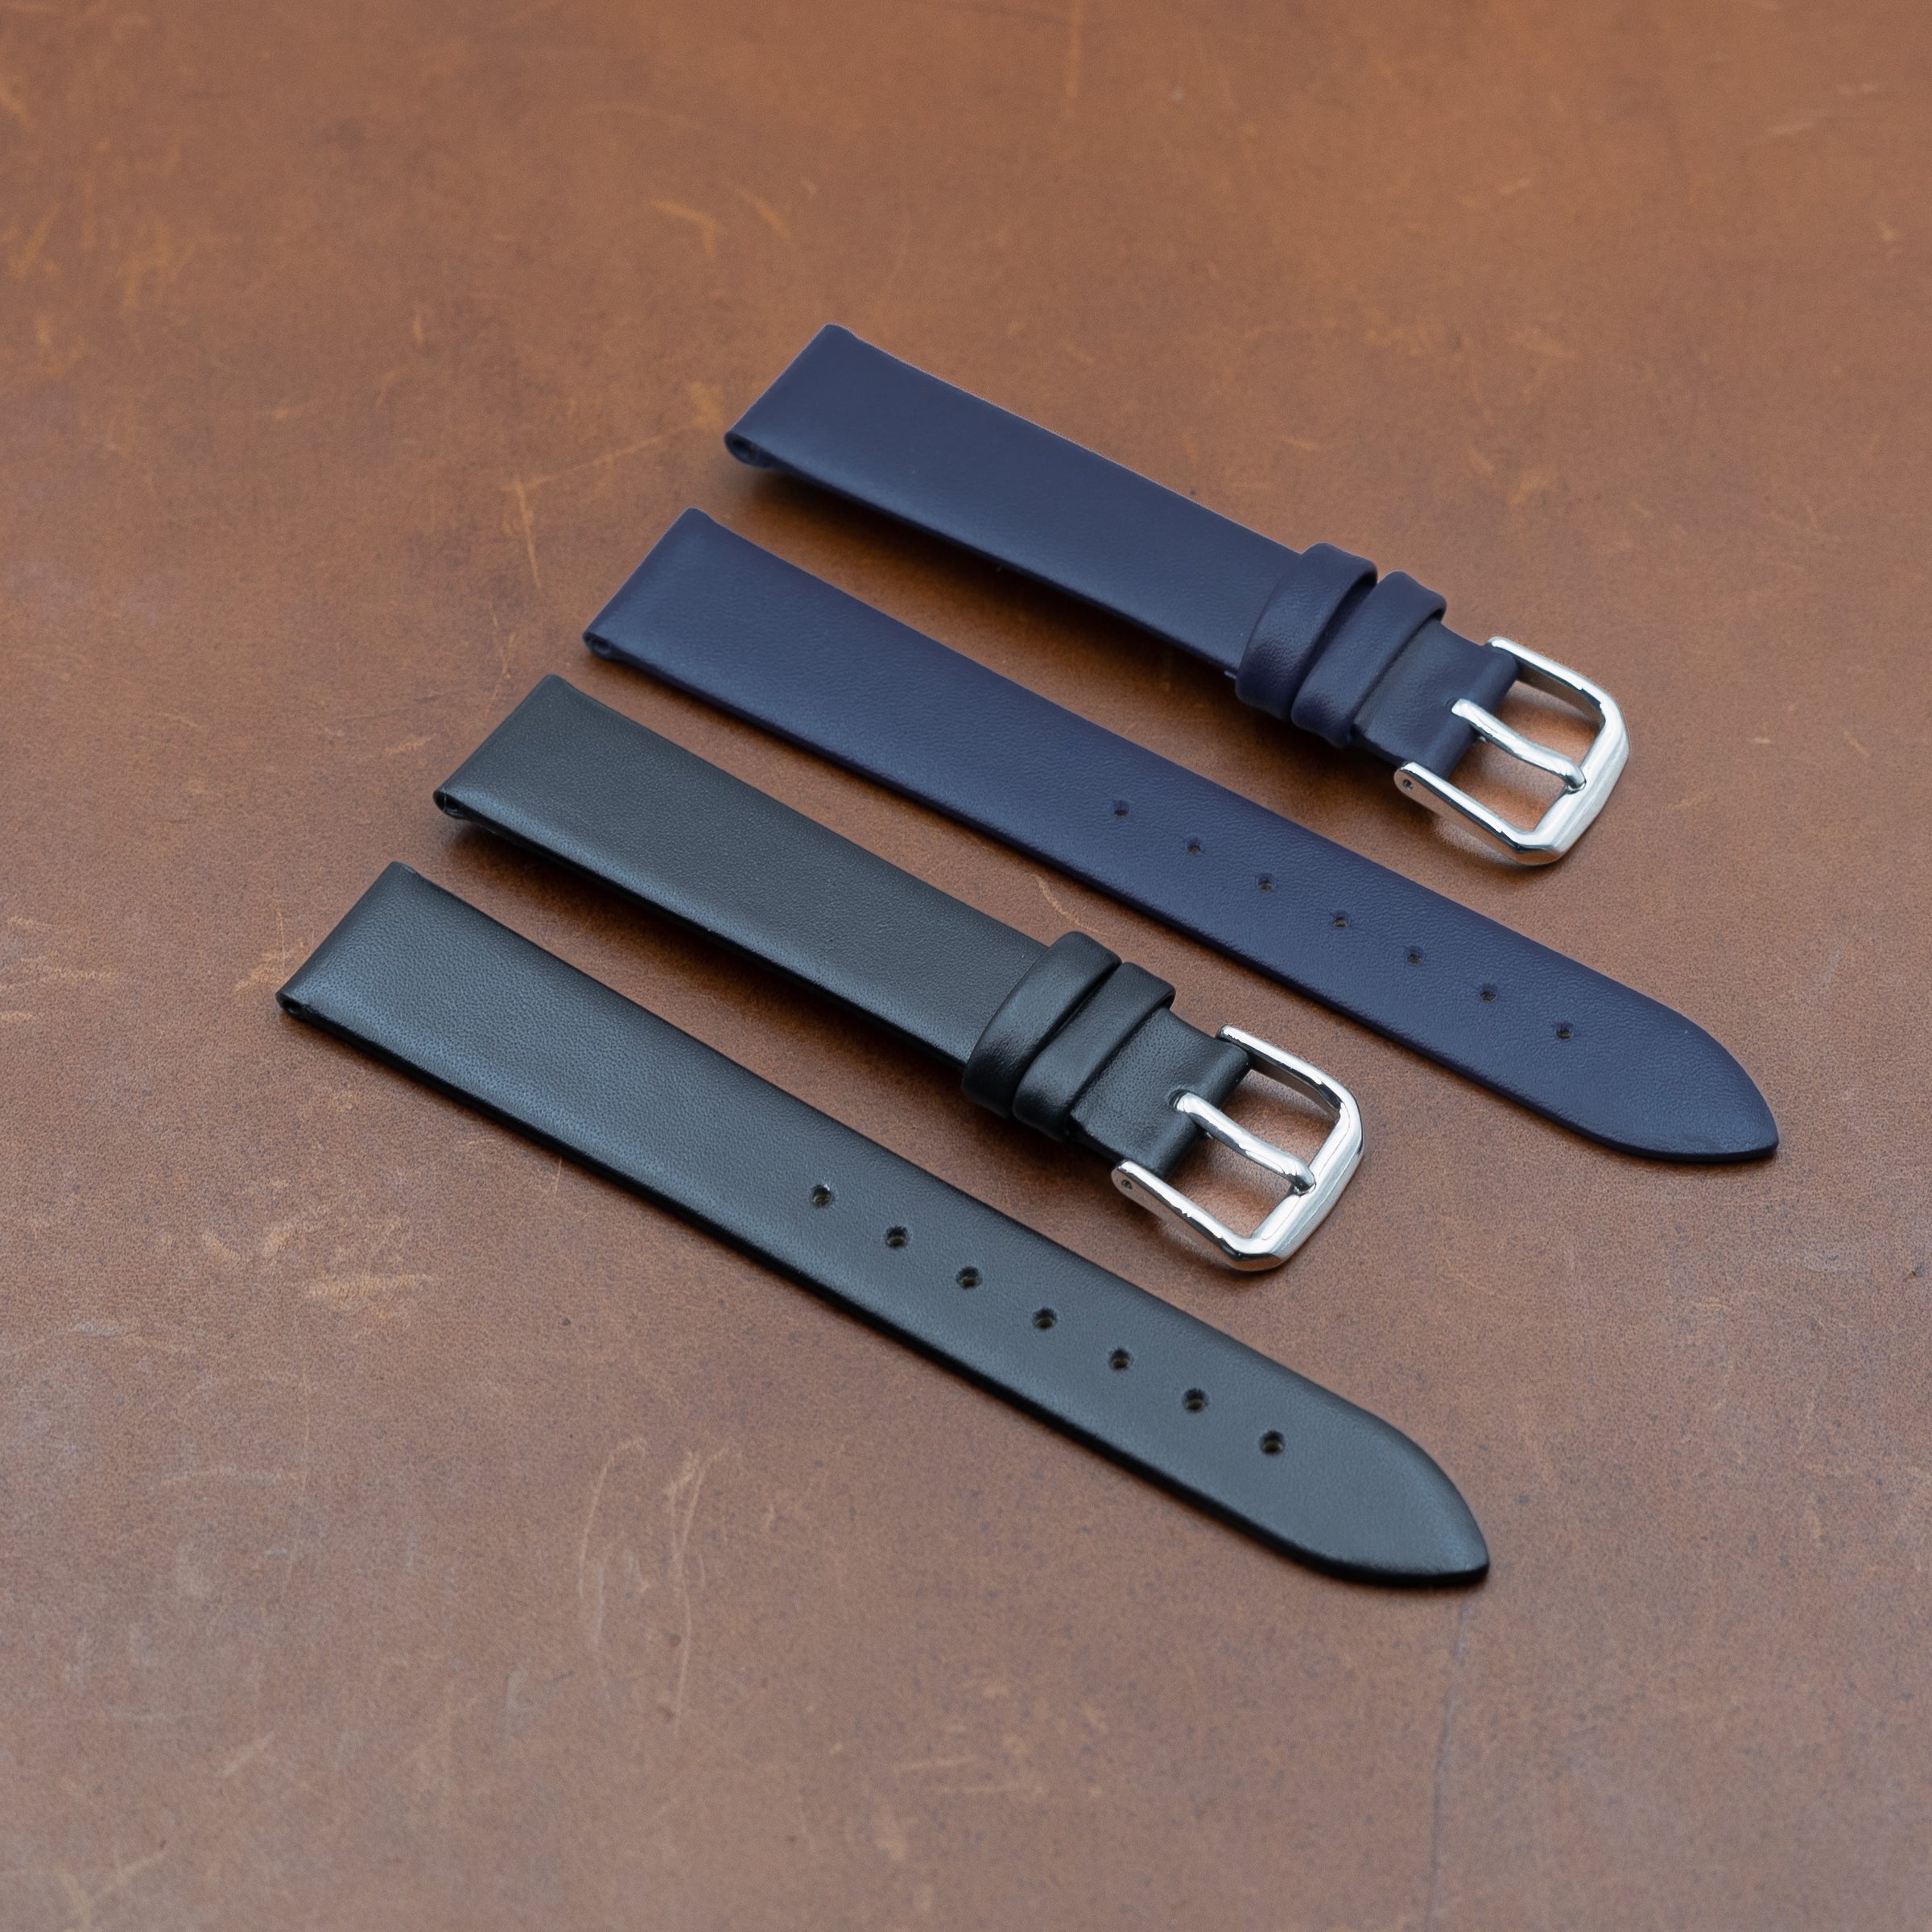 Unstitched Smooth Leather Watch Strap in Black (12mm) - Nomad Watch Works SG